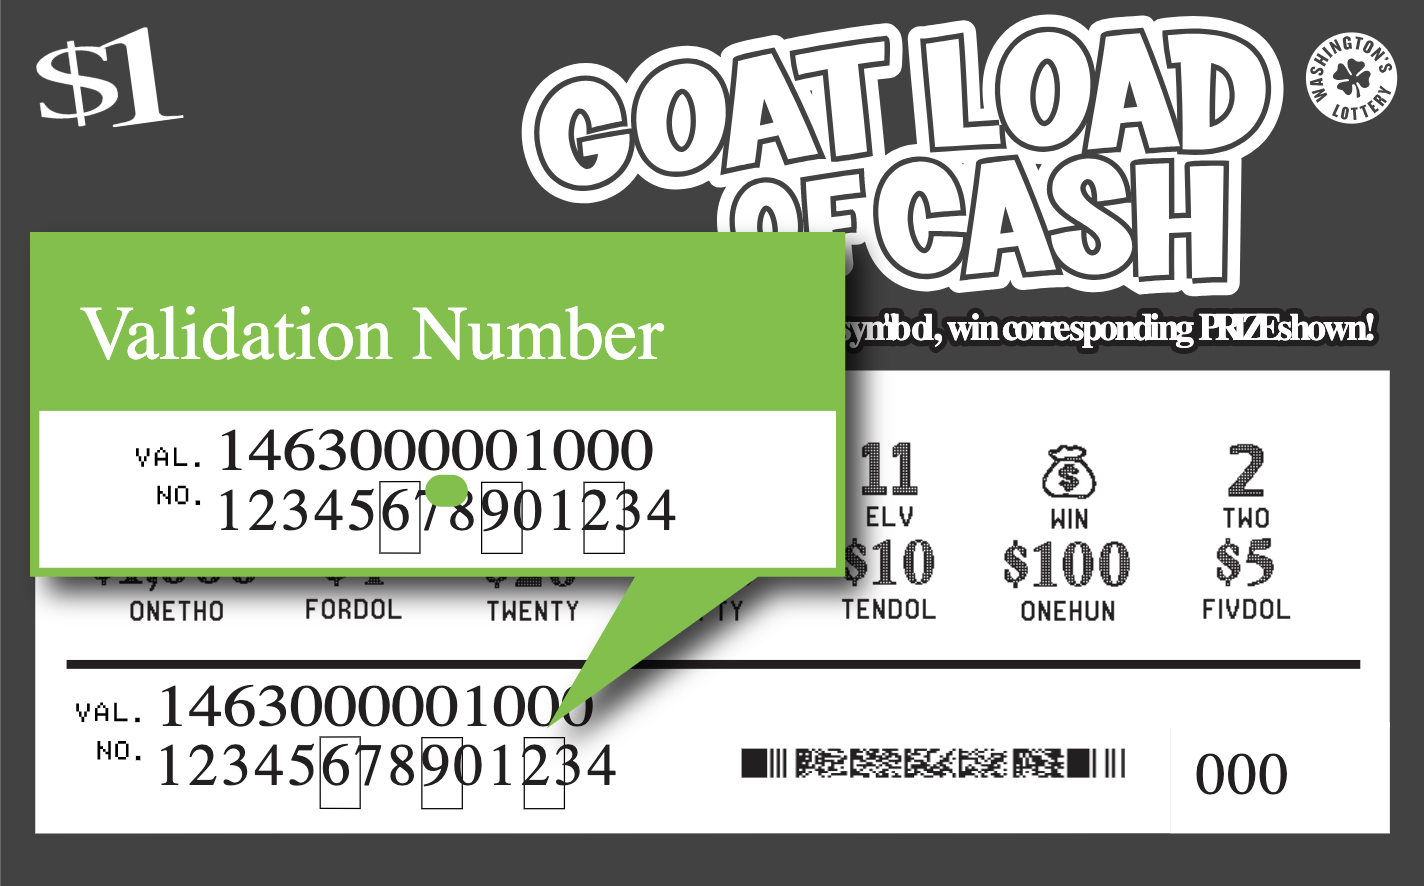 Scratch Ticket example highlighting entry information.